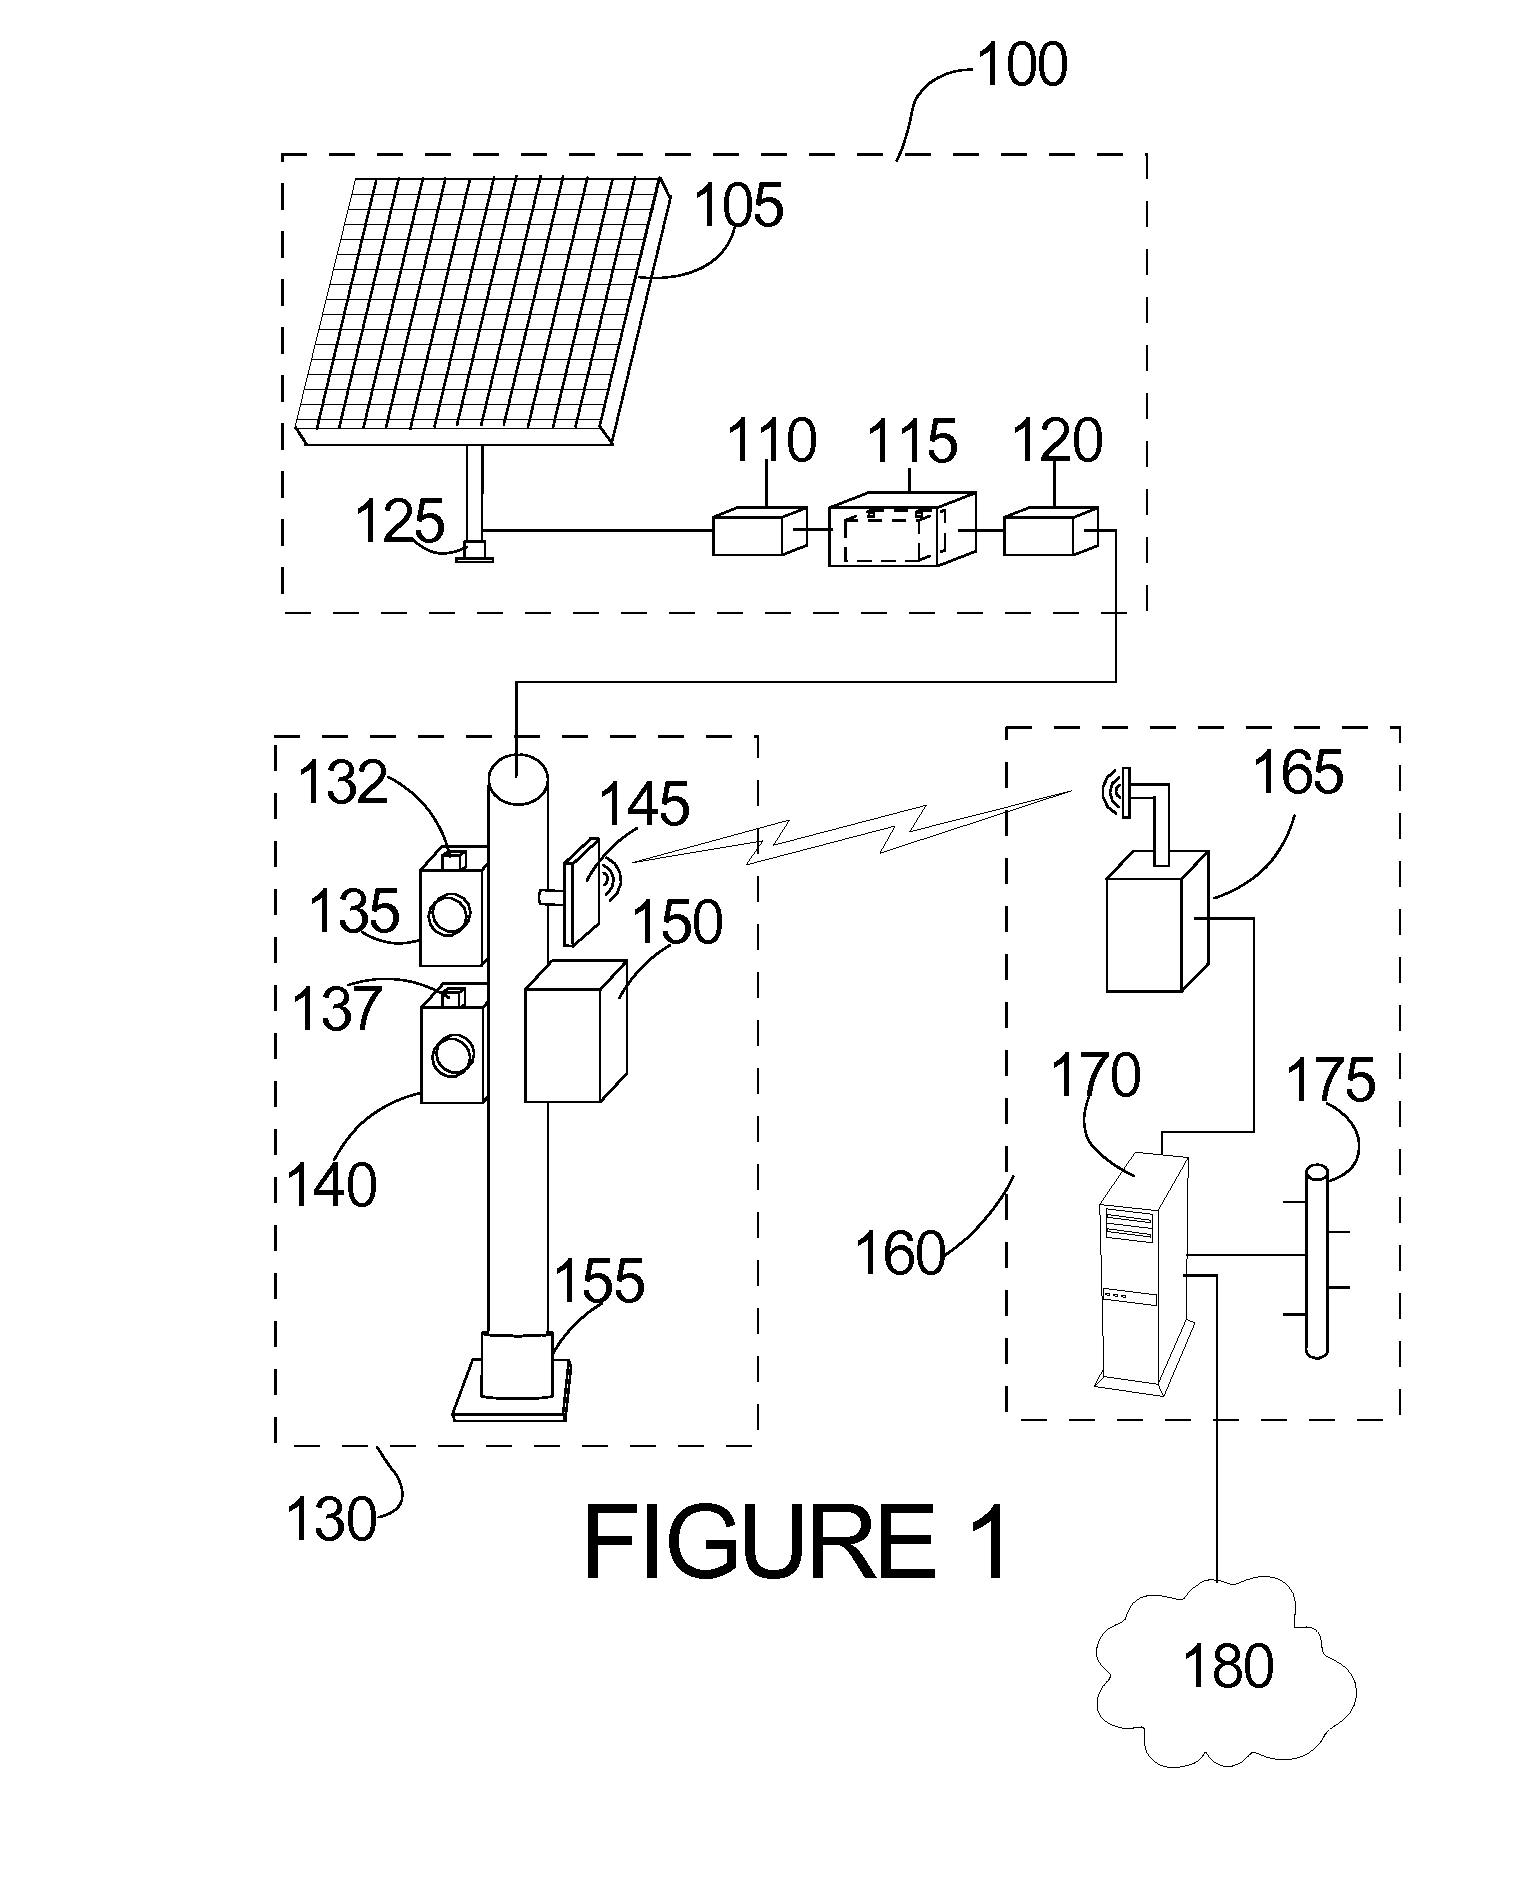 Wireless, battery-powered, photovoltaically charged and monitored runway-based aircraft identification system and method